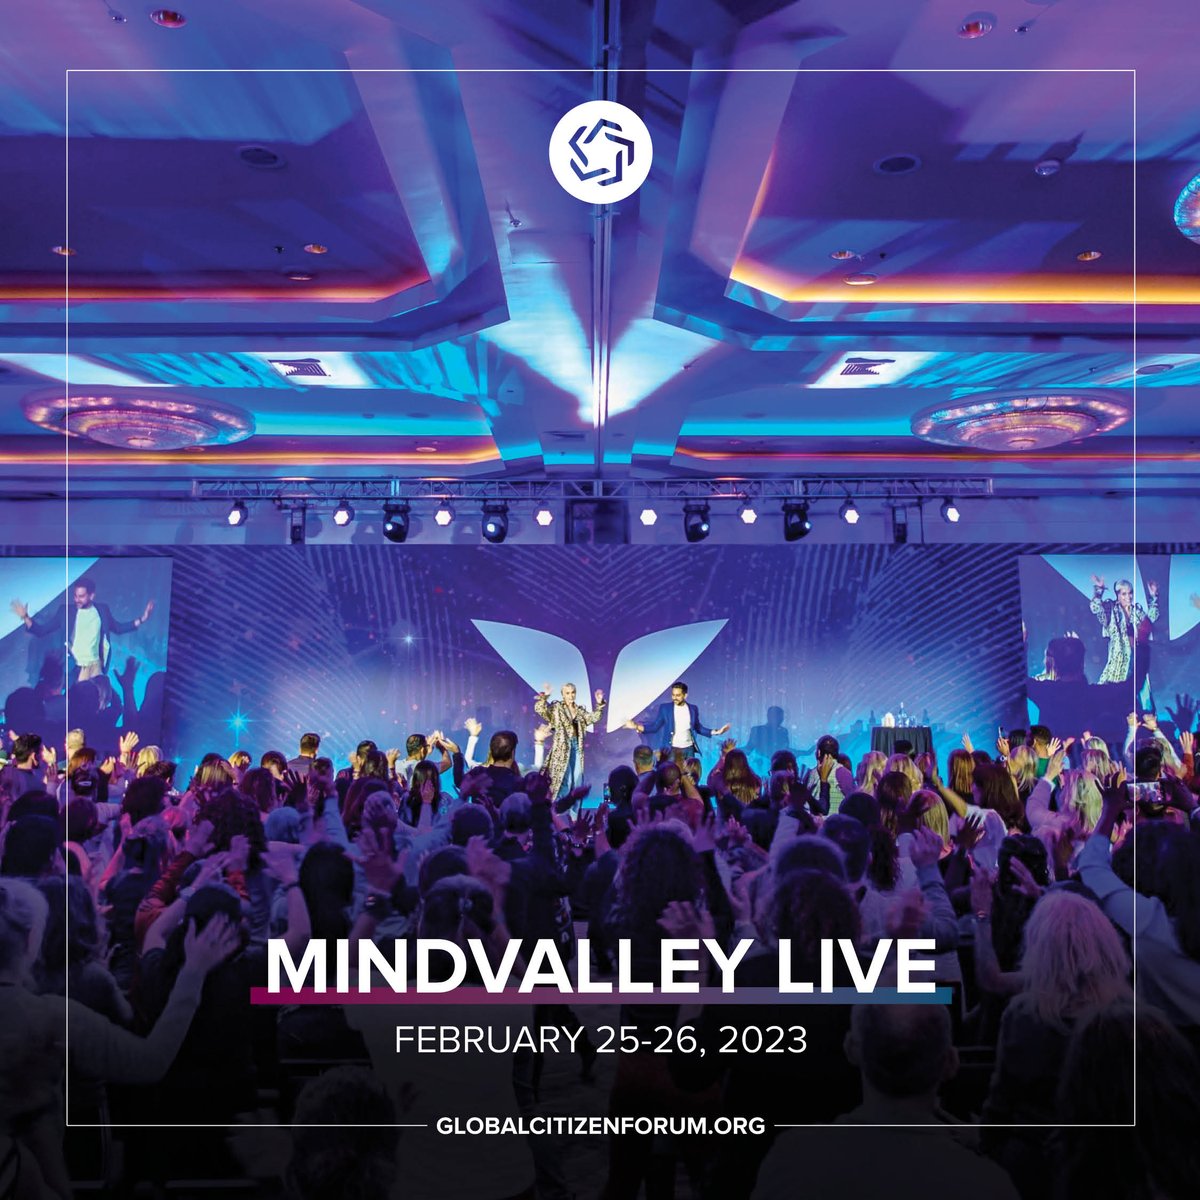 Get ready to level up your life! 🚀 Join us for Mindvalley's biggest event of the year, Mindvalley Live, on February 25-26. This weekend is all about exhilarating growth, bonding with amazing people, and creating magic moments you'll never forget. 💫